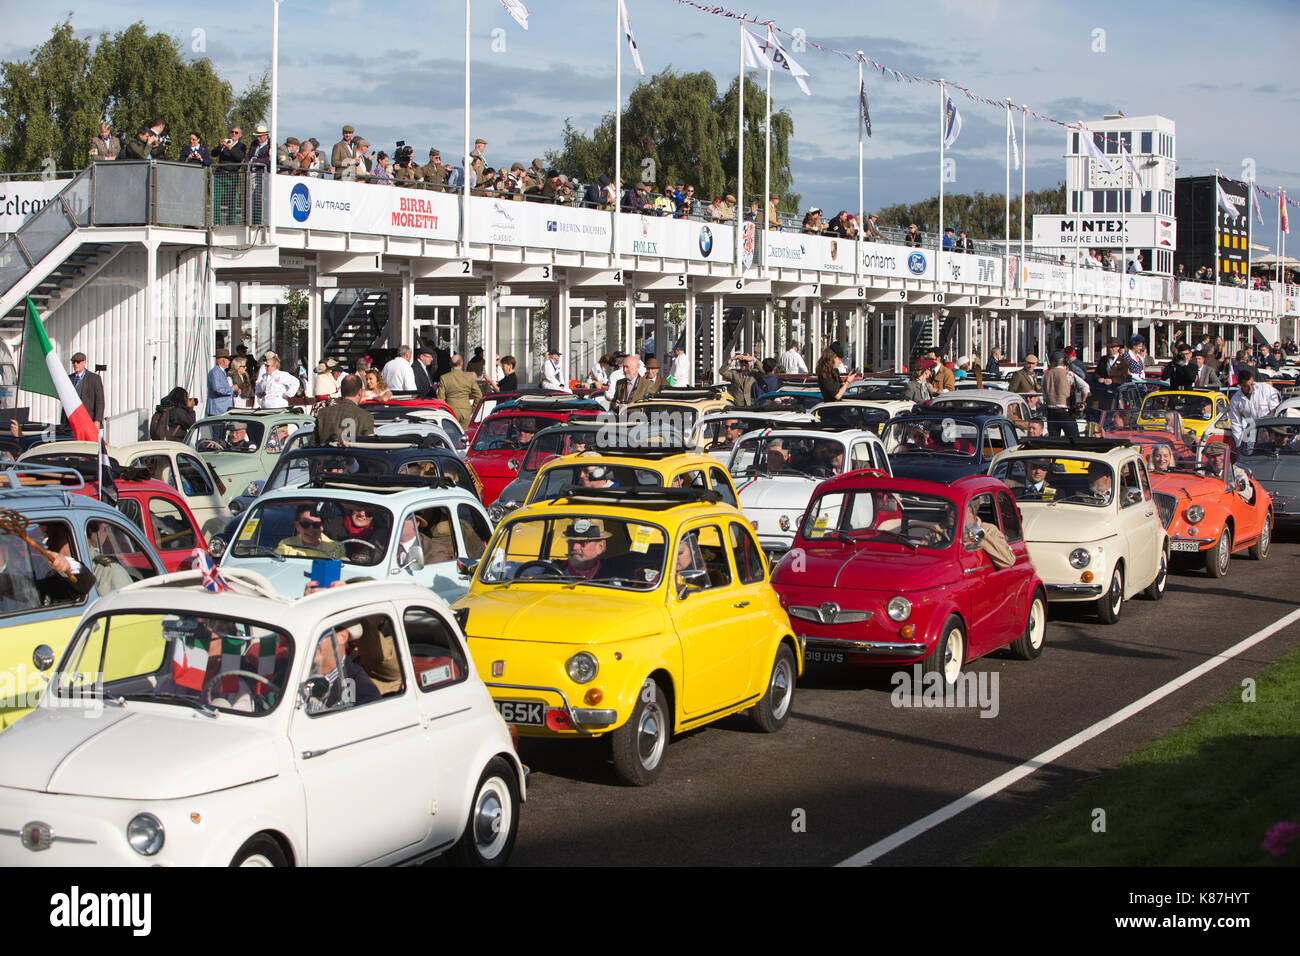 Fiat 500 parade, Goodwood Revival meeting 2017, goodwood race track, Chichester, West Sussex, England, UK Banque D'Images